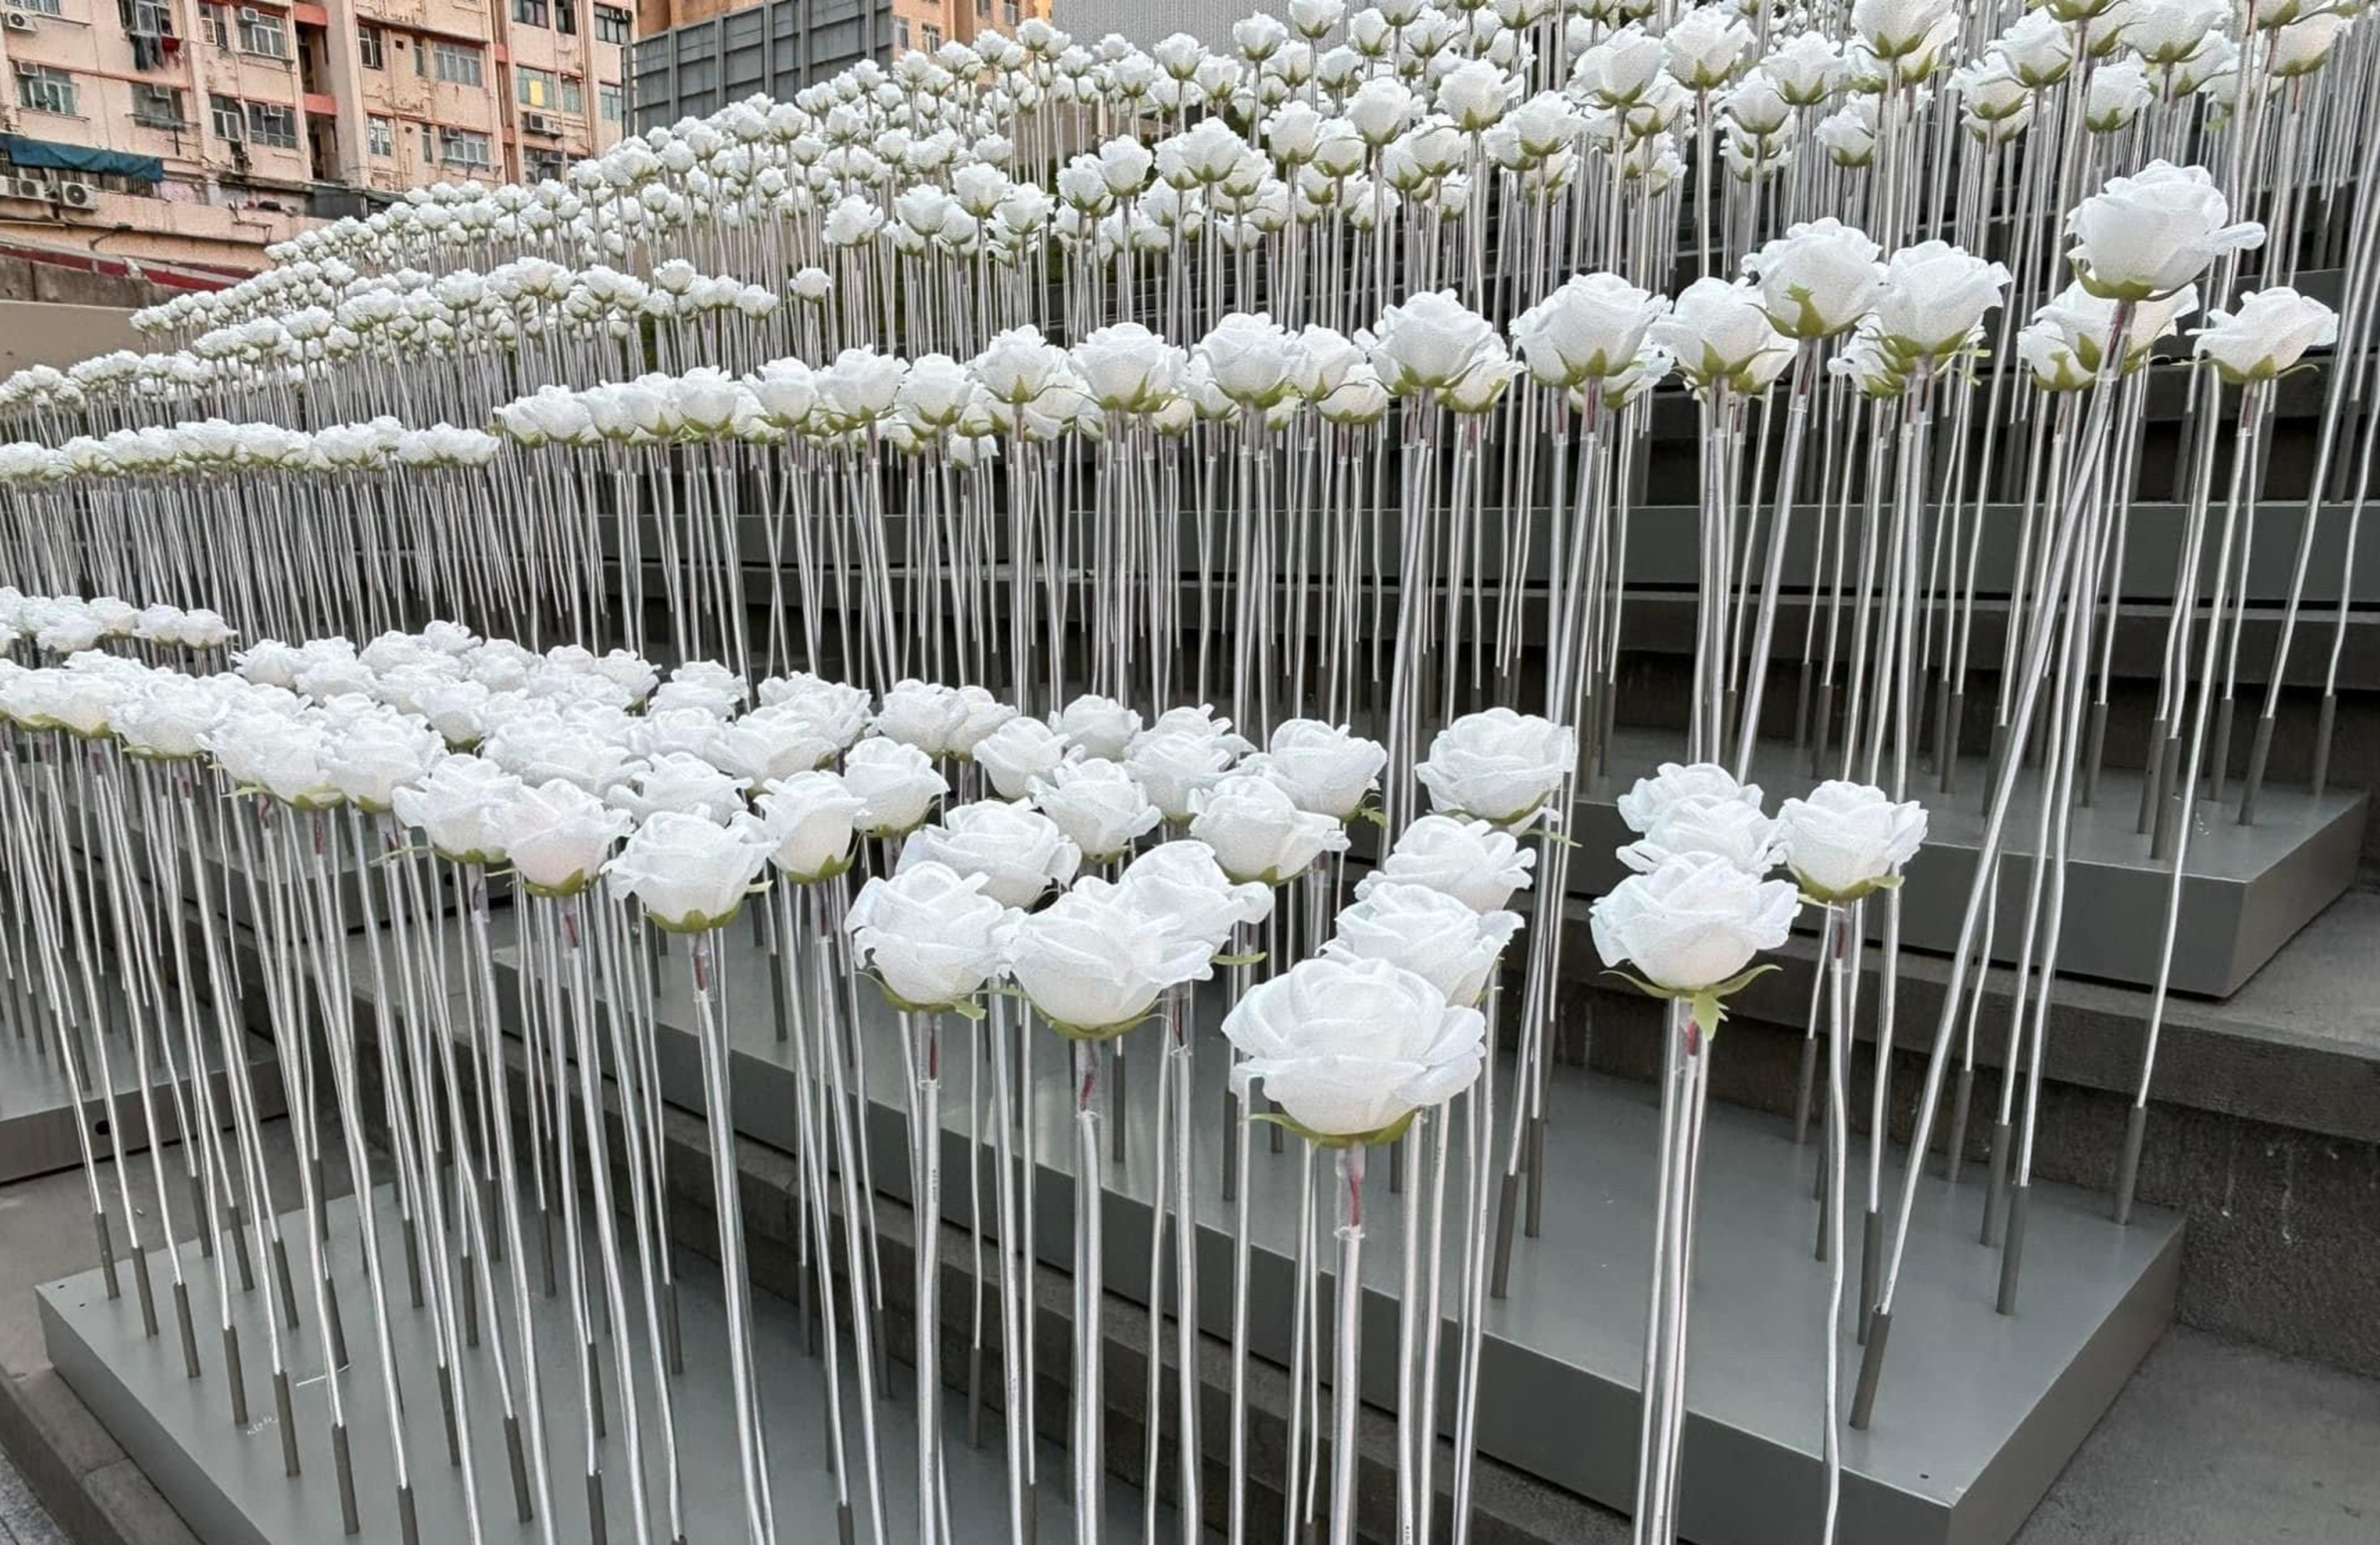 The LED flower installation in East Kowloon. Social media users have panned the artwork for resembling a funeral parlour. Facebook/Chun Ming Lam